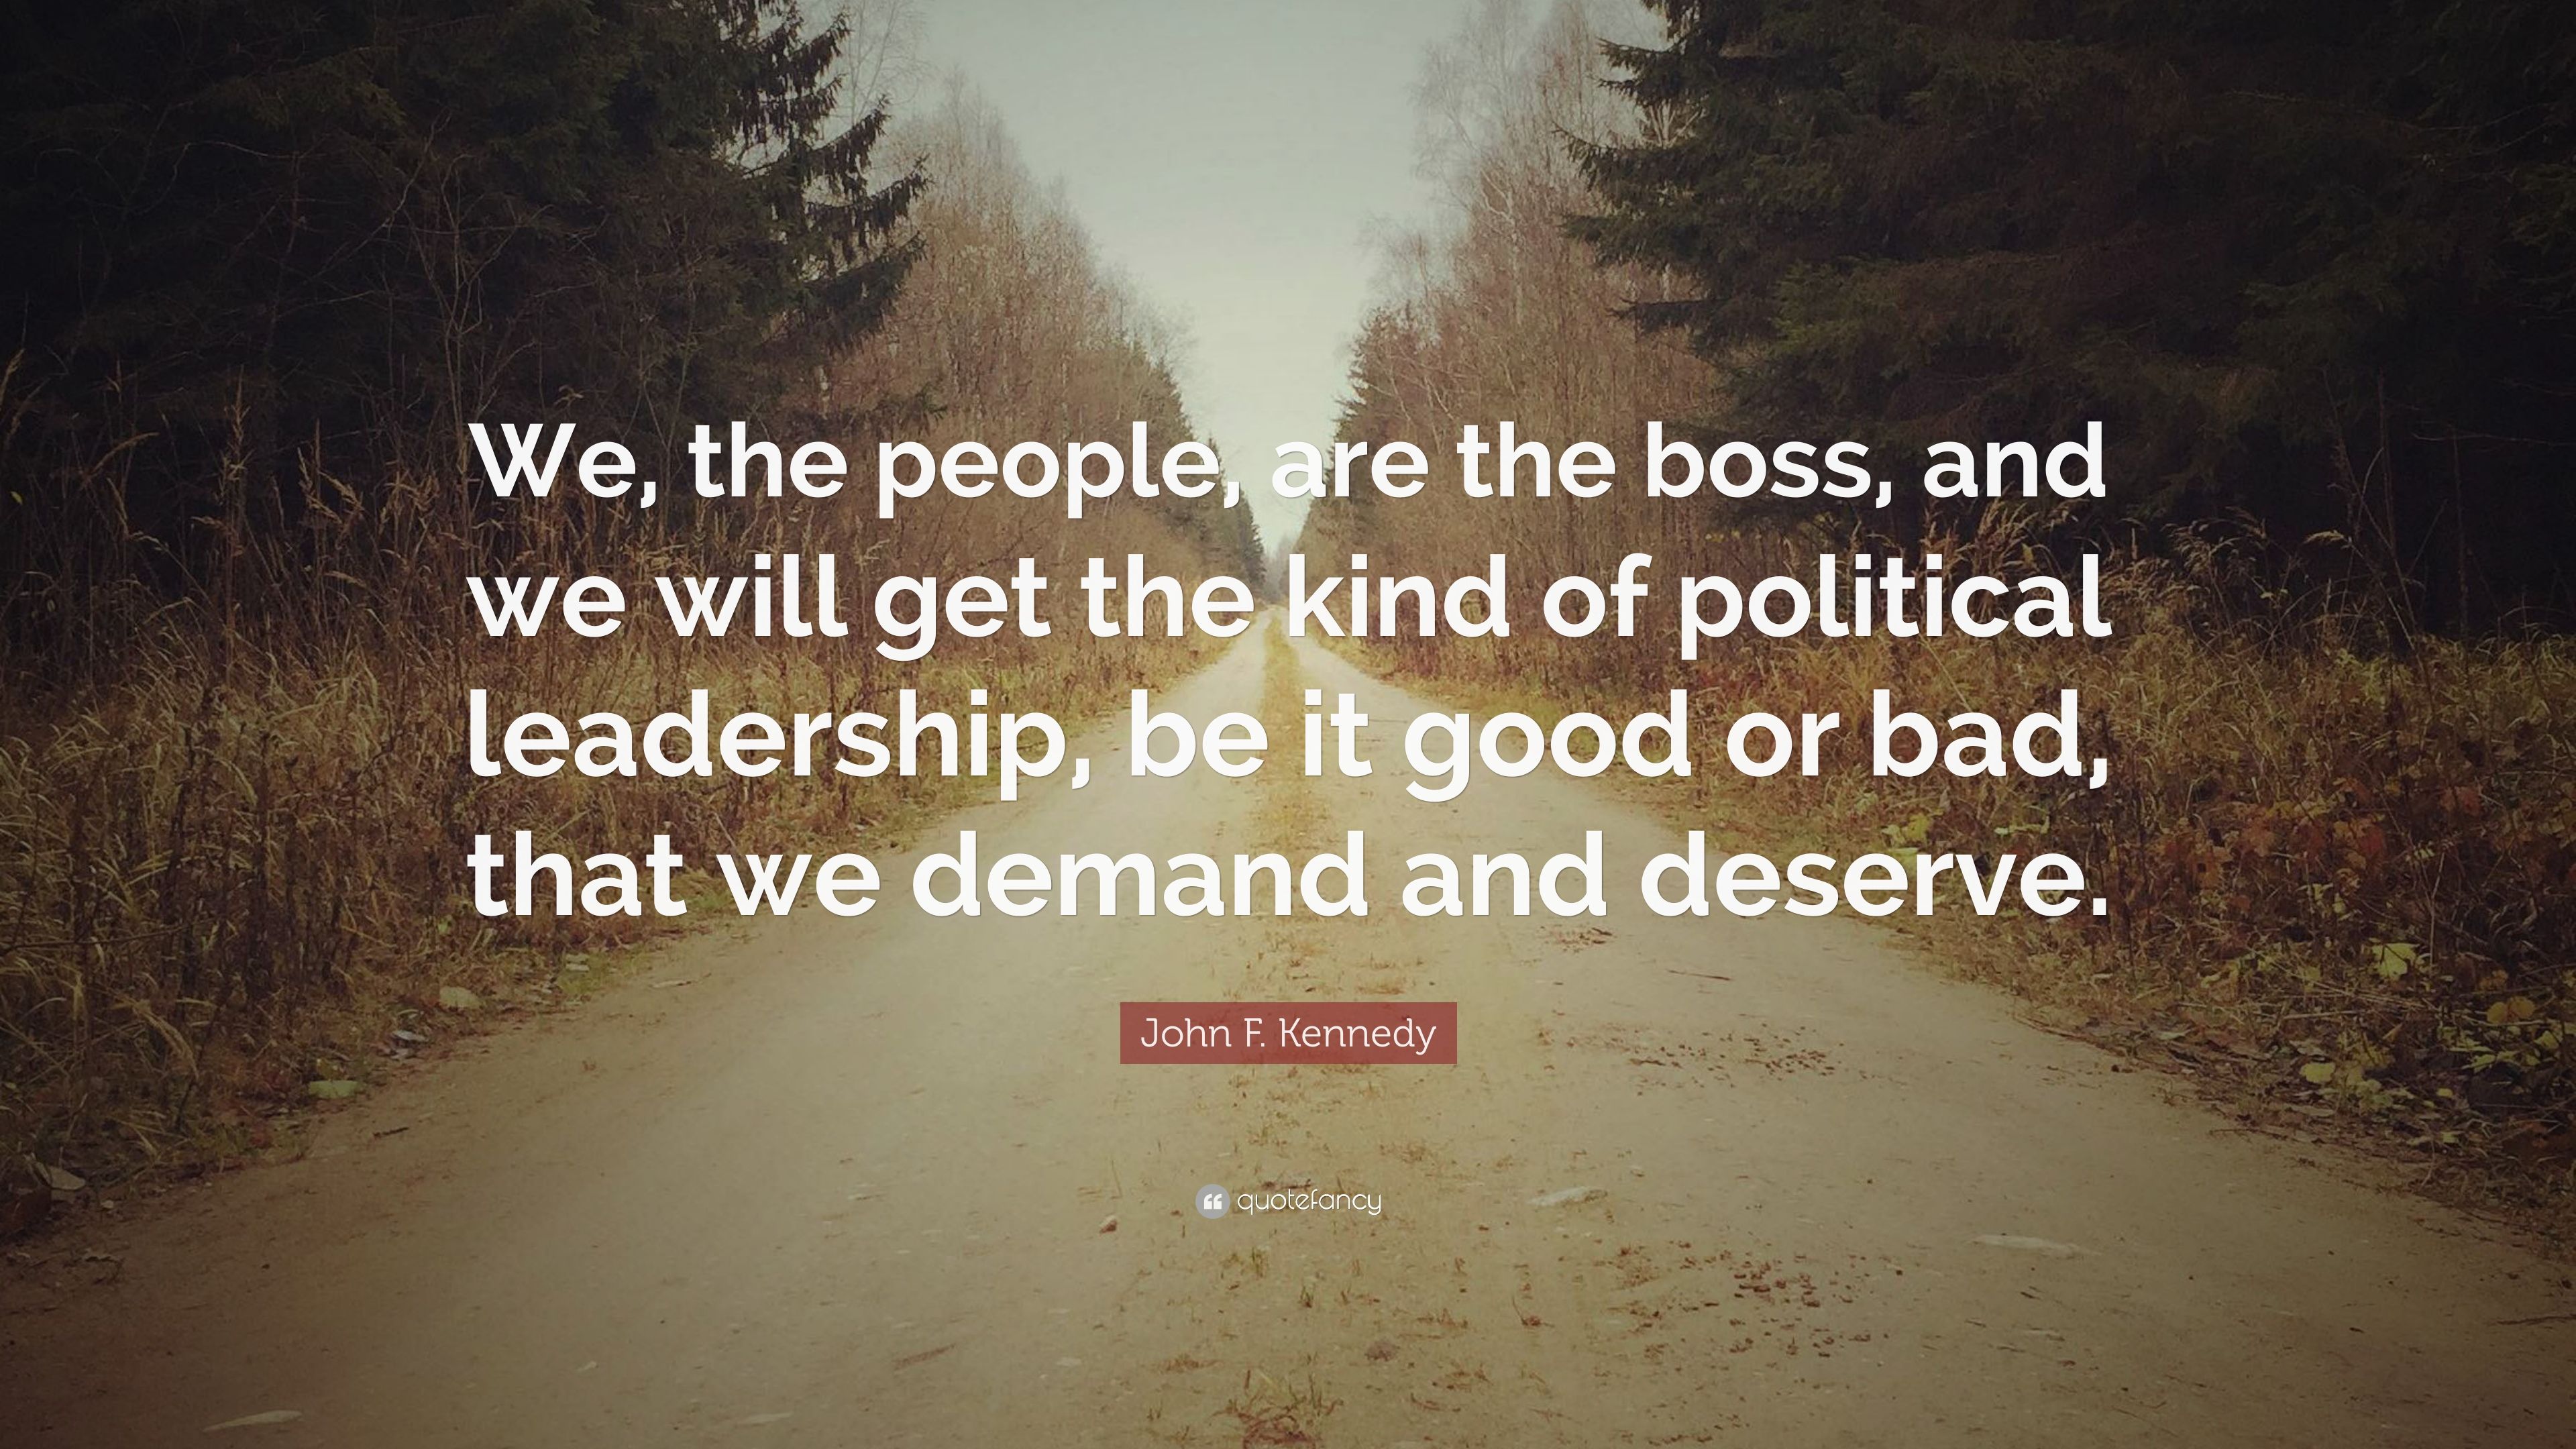 John F. Kennedy Quote: “We, the people, are the boss, and we will